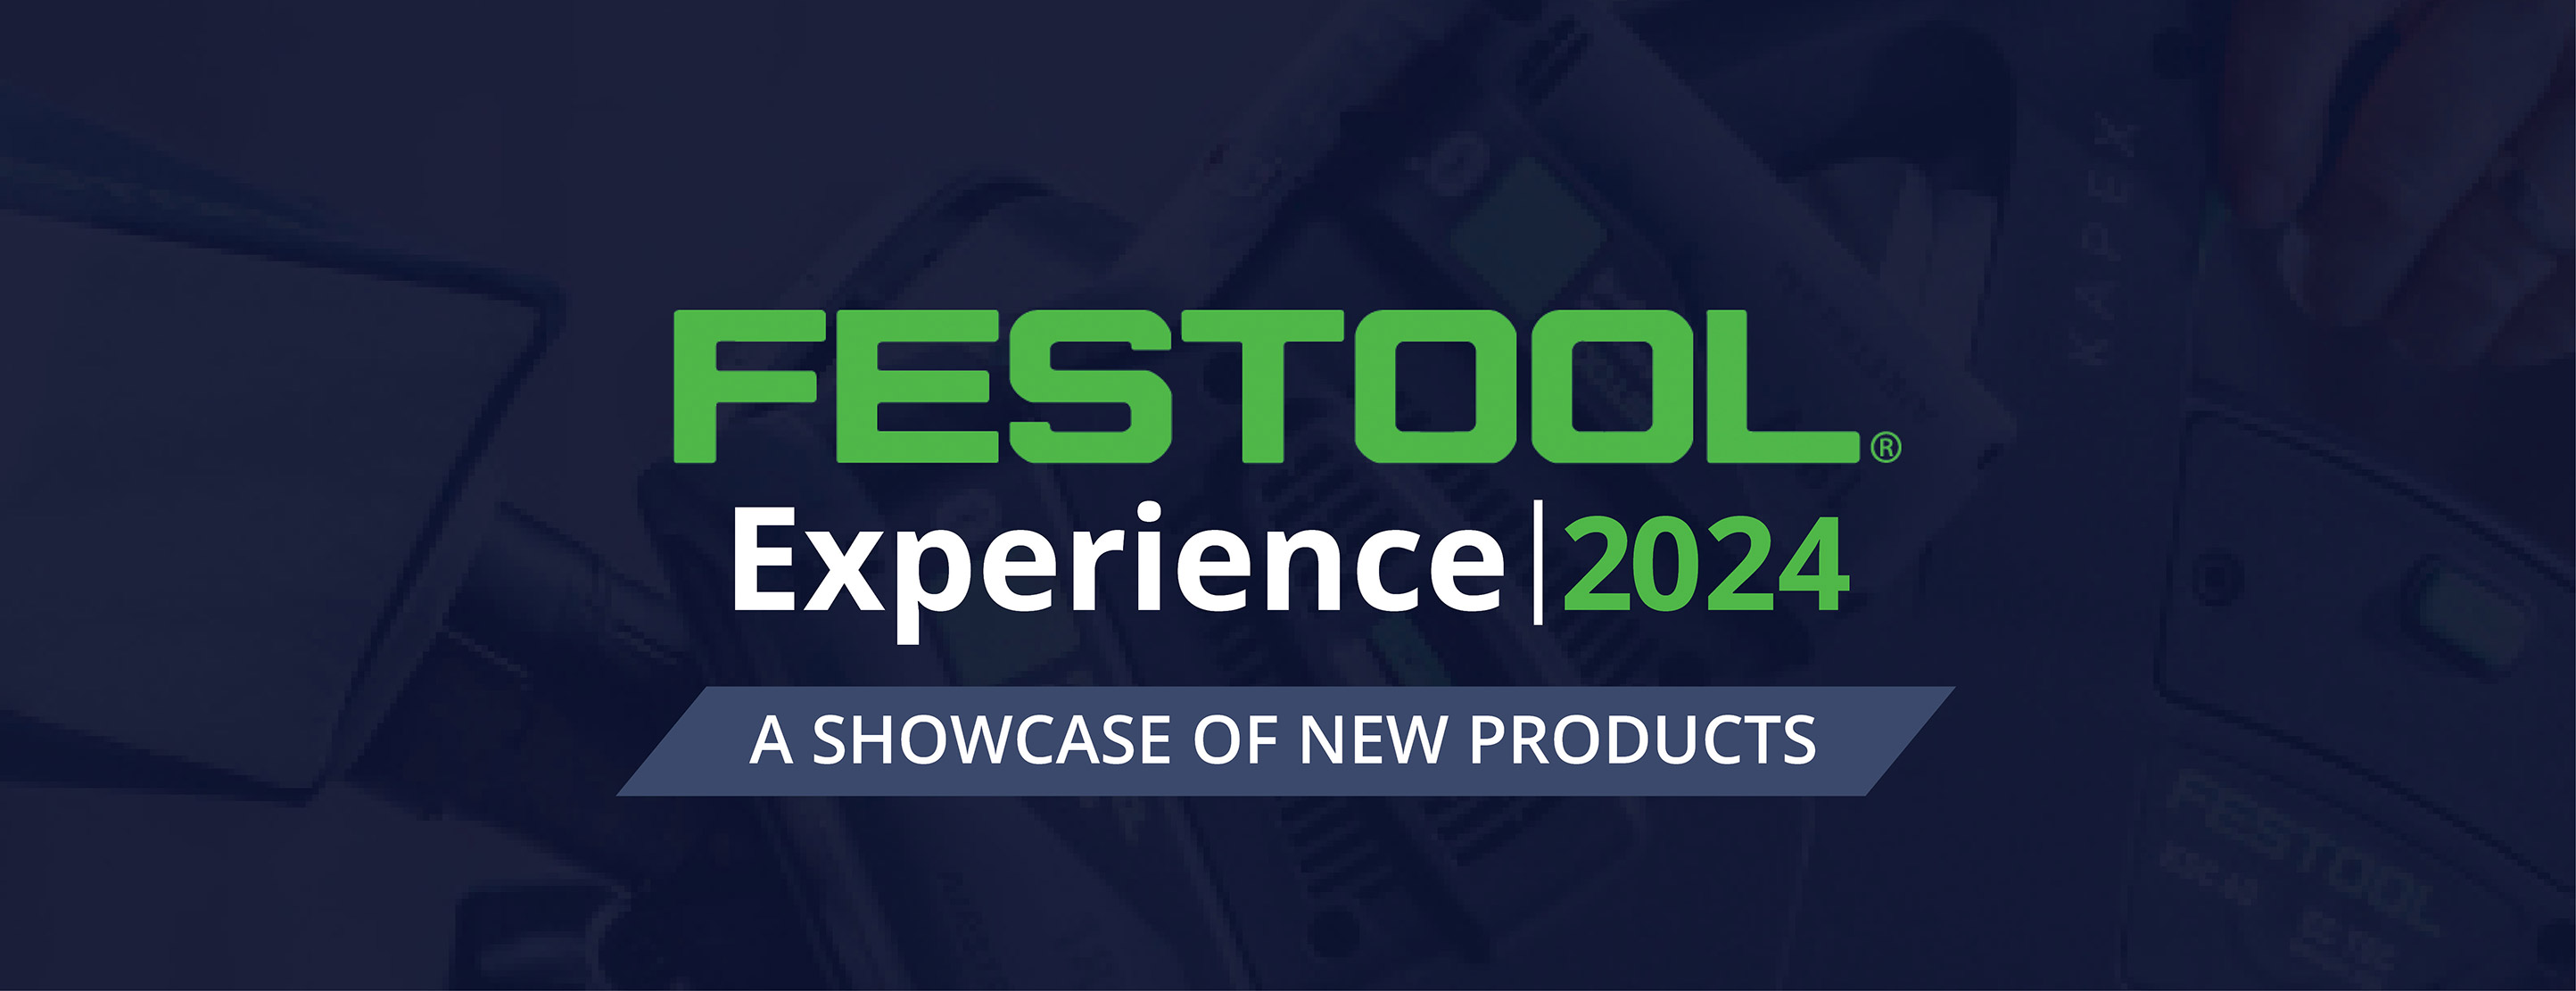 Festool Experience 2024. A showcase of new products.